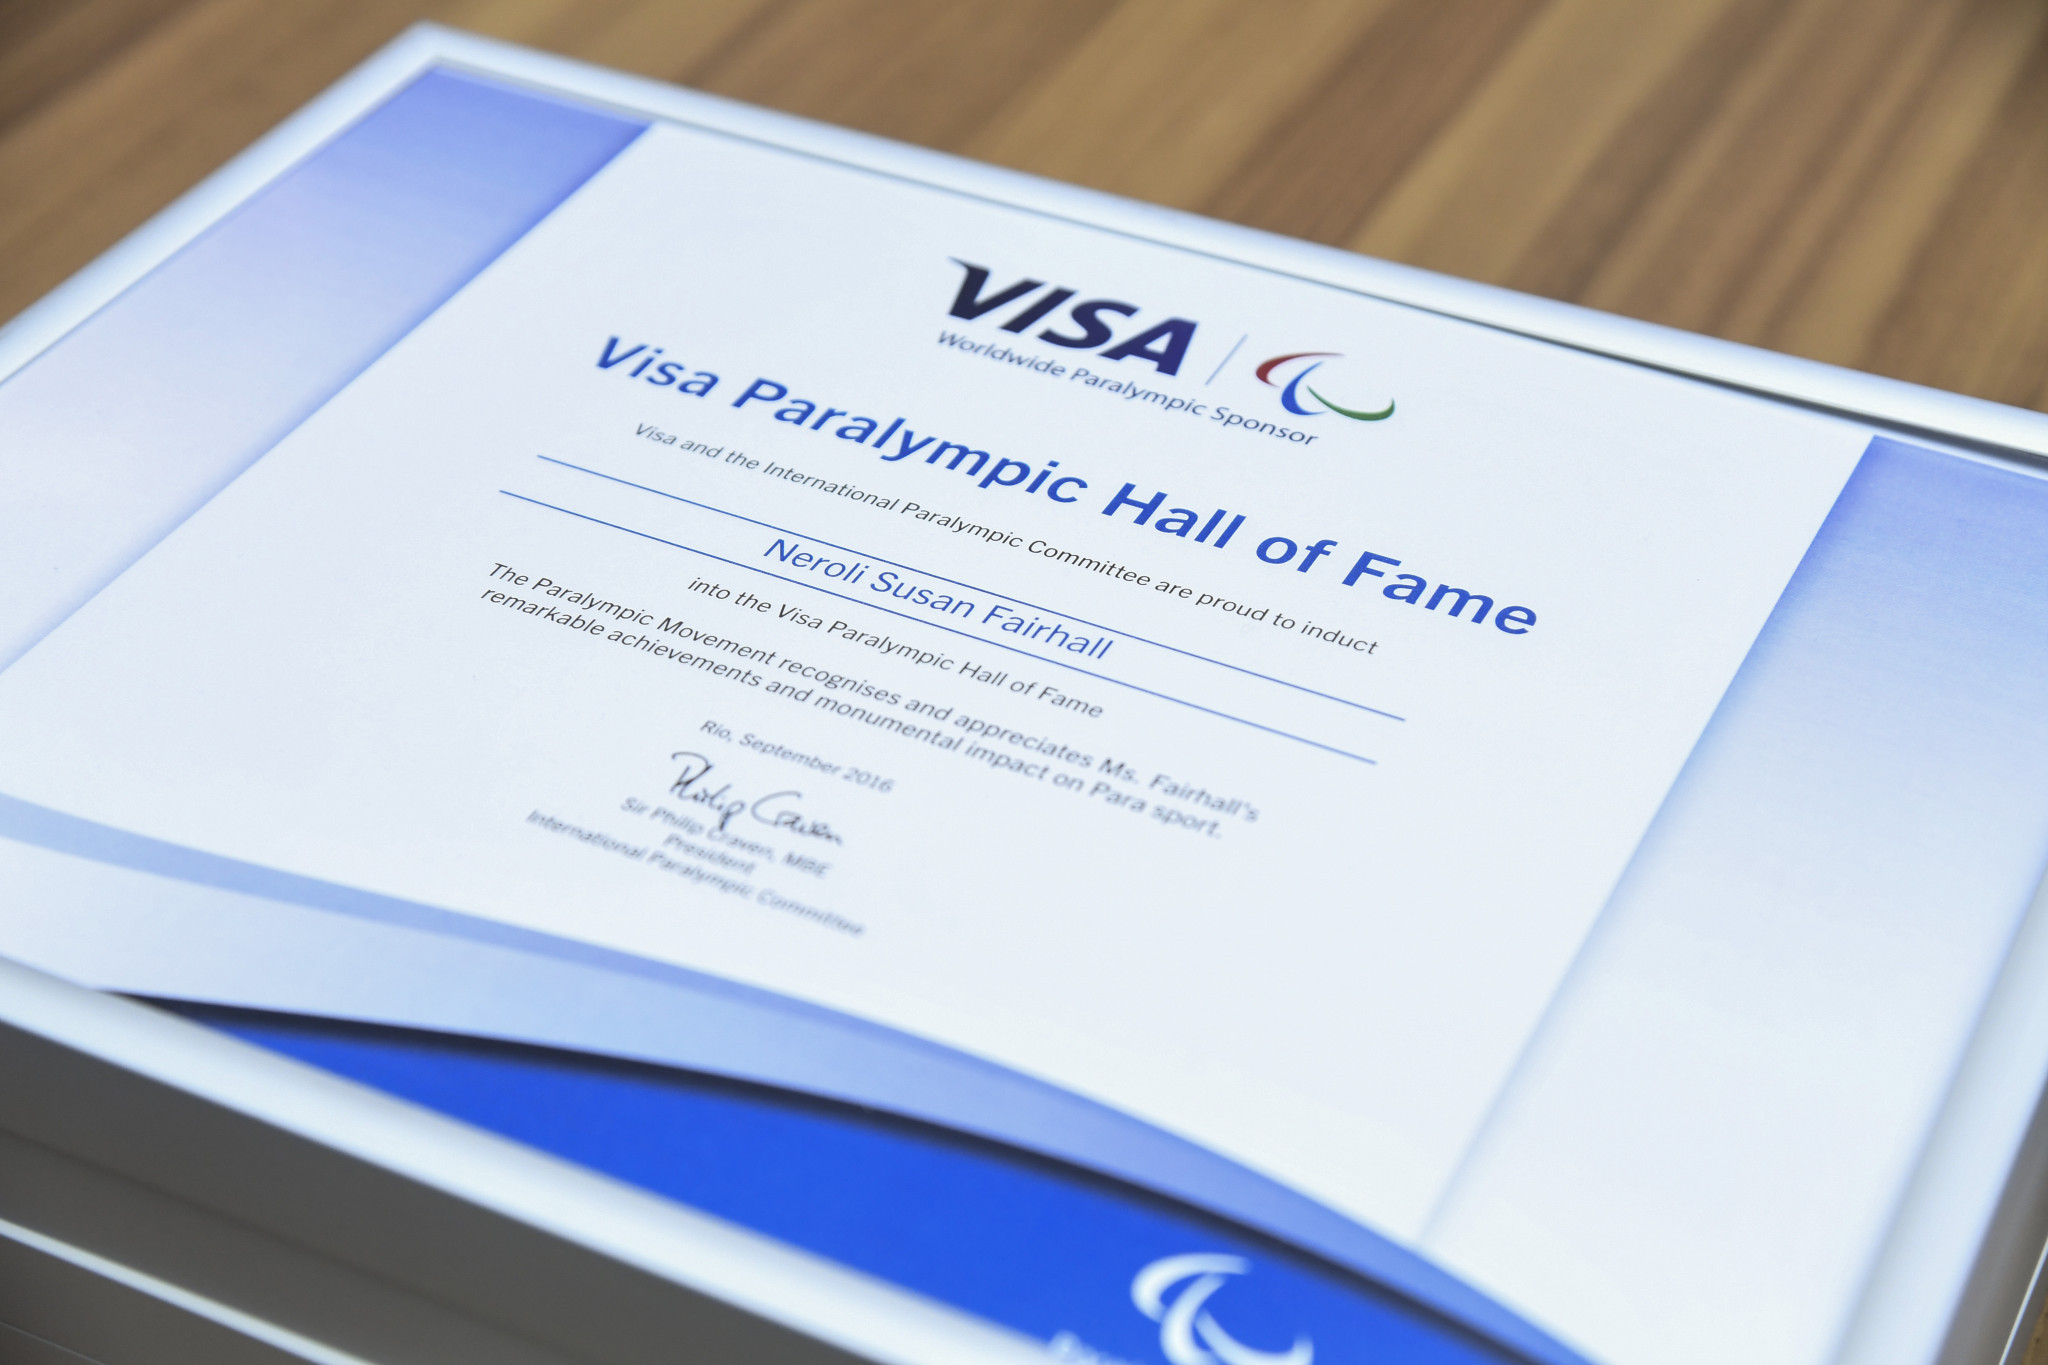 Visa has supported Paralympic sport since 2003, including initiatives such as the Hall of Fame ©Getty Images